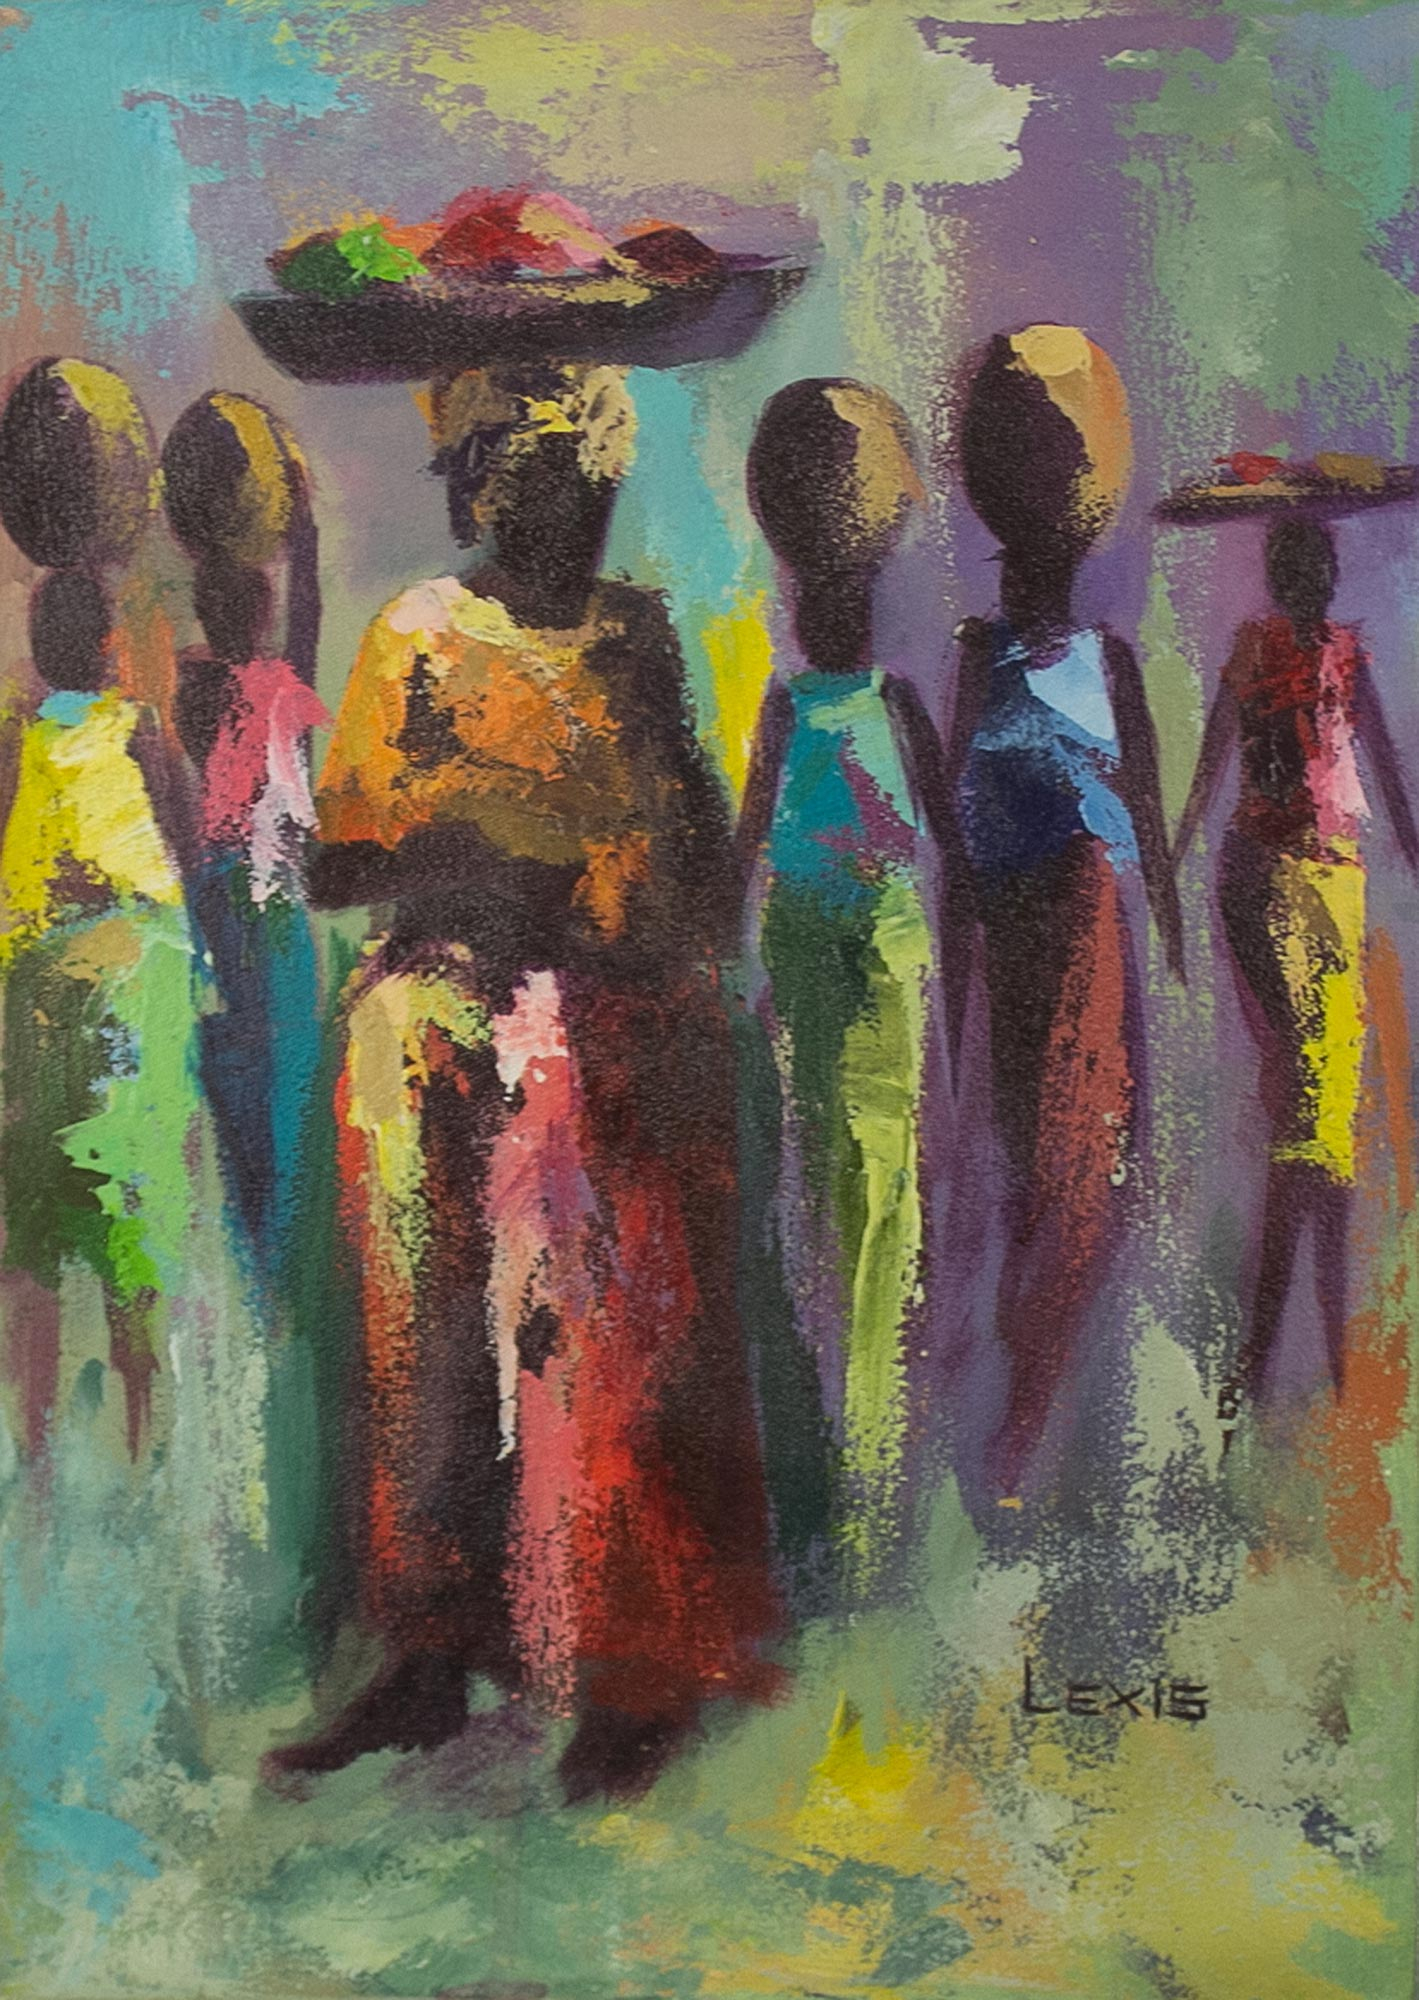 West African Original Market Scene Painting Busy Busy Busy Day NOVICA